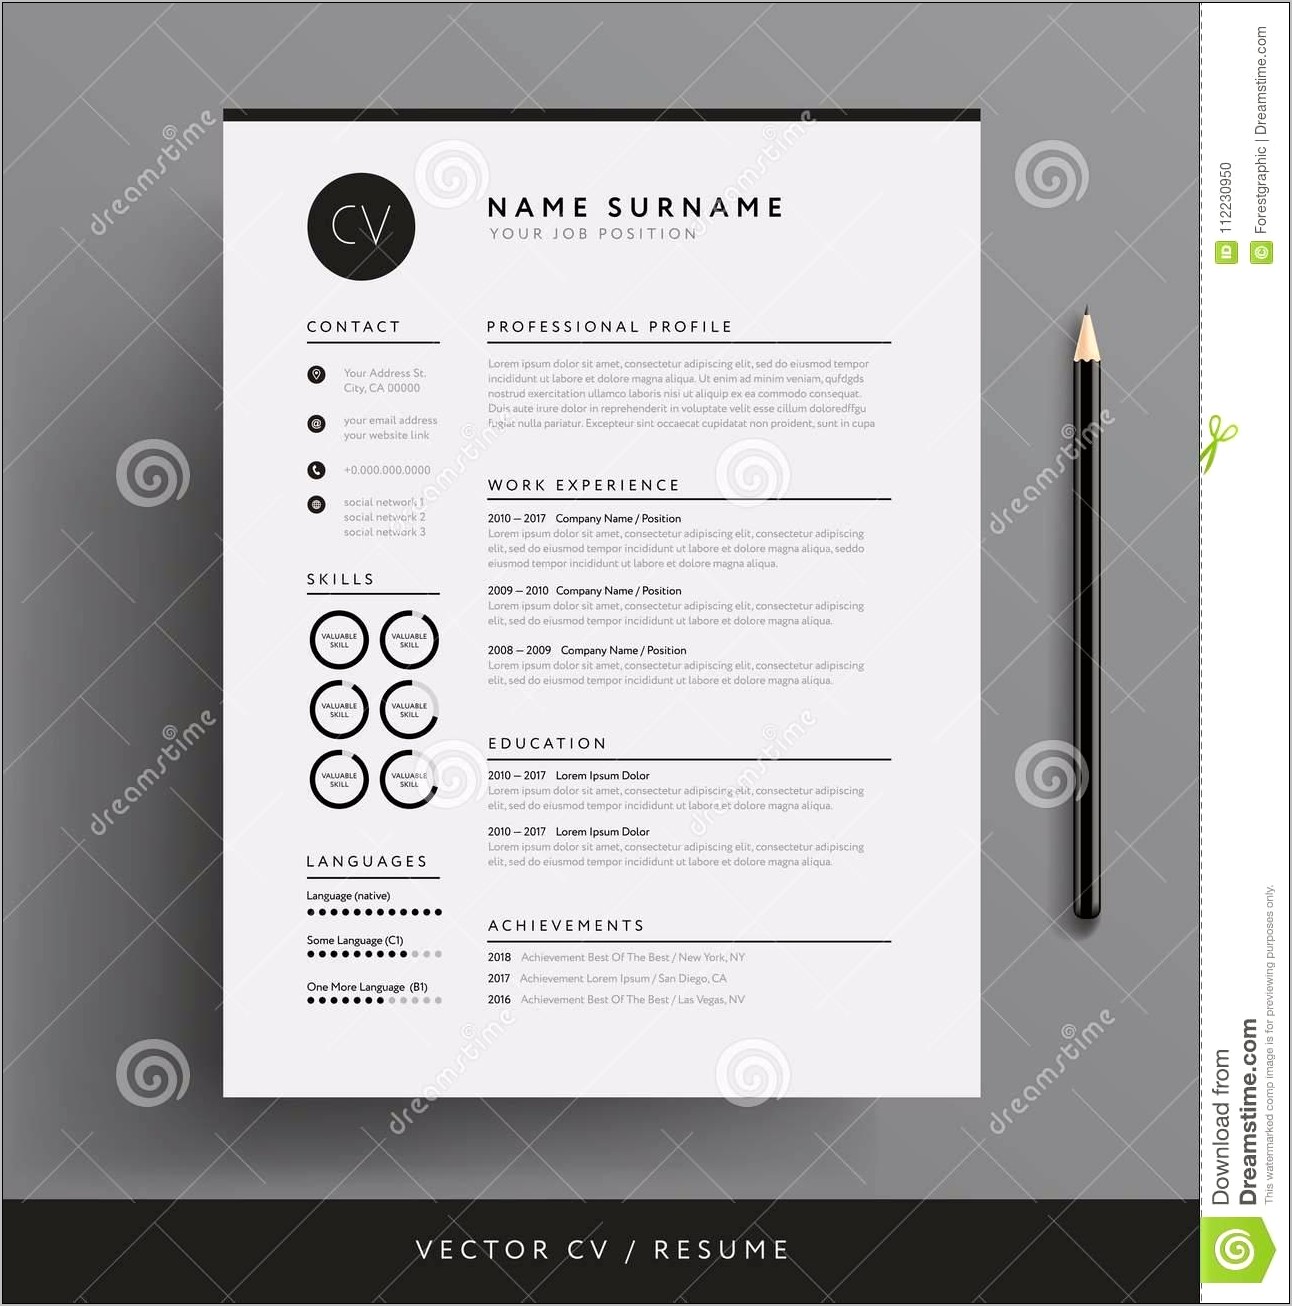 Best Black And White Resume Templates